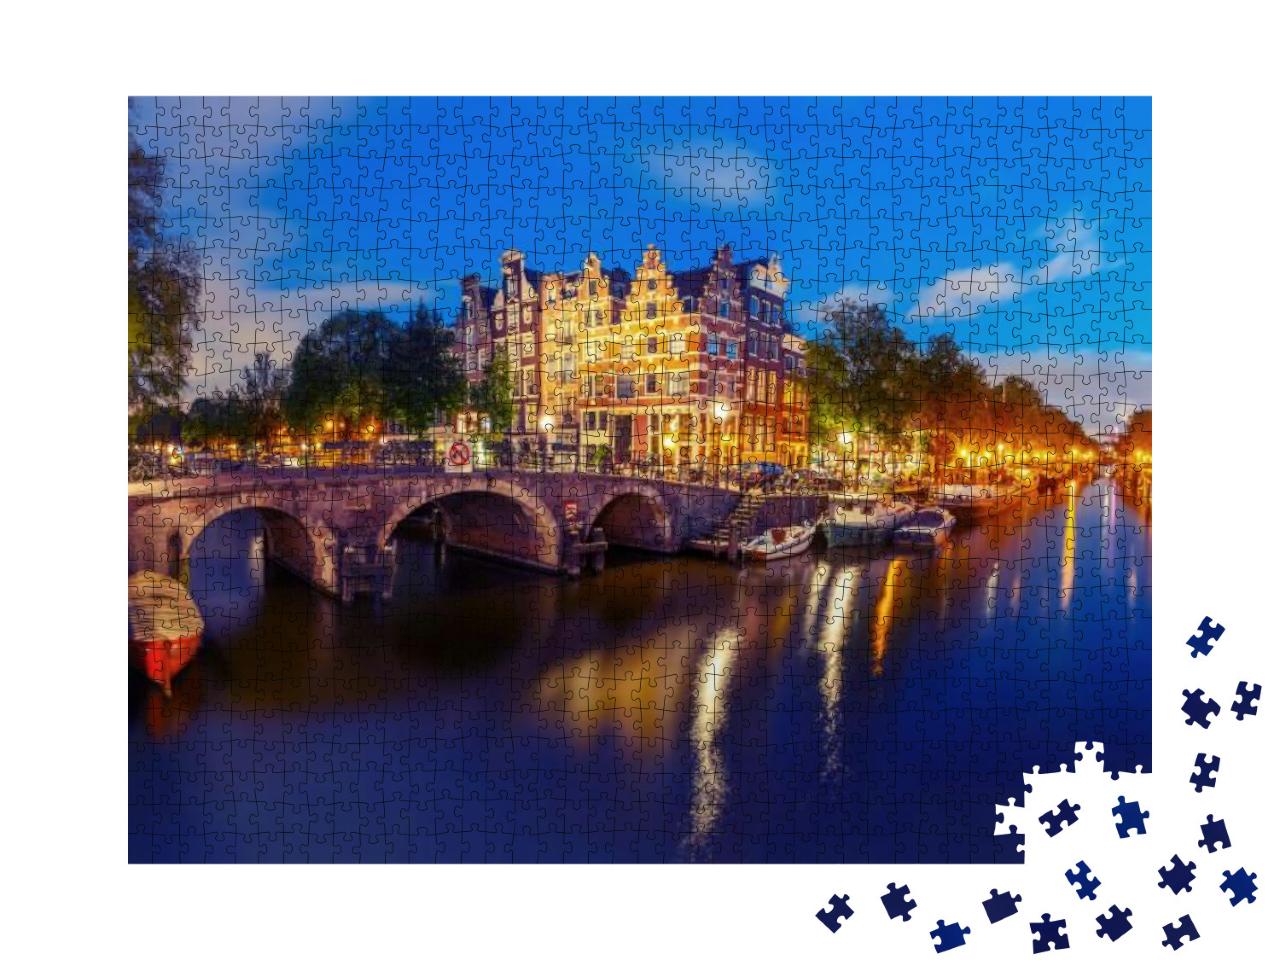 Amsterdam Canal, Bridge & Typical Houses, Boats & Bicycle... Jigsaw Puzzle with 1000 pieces